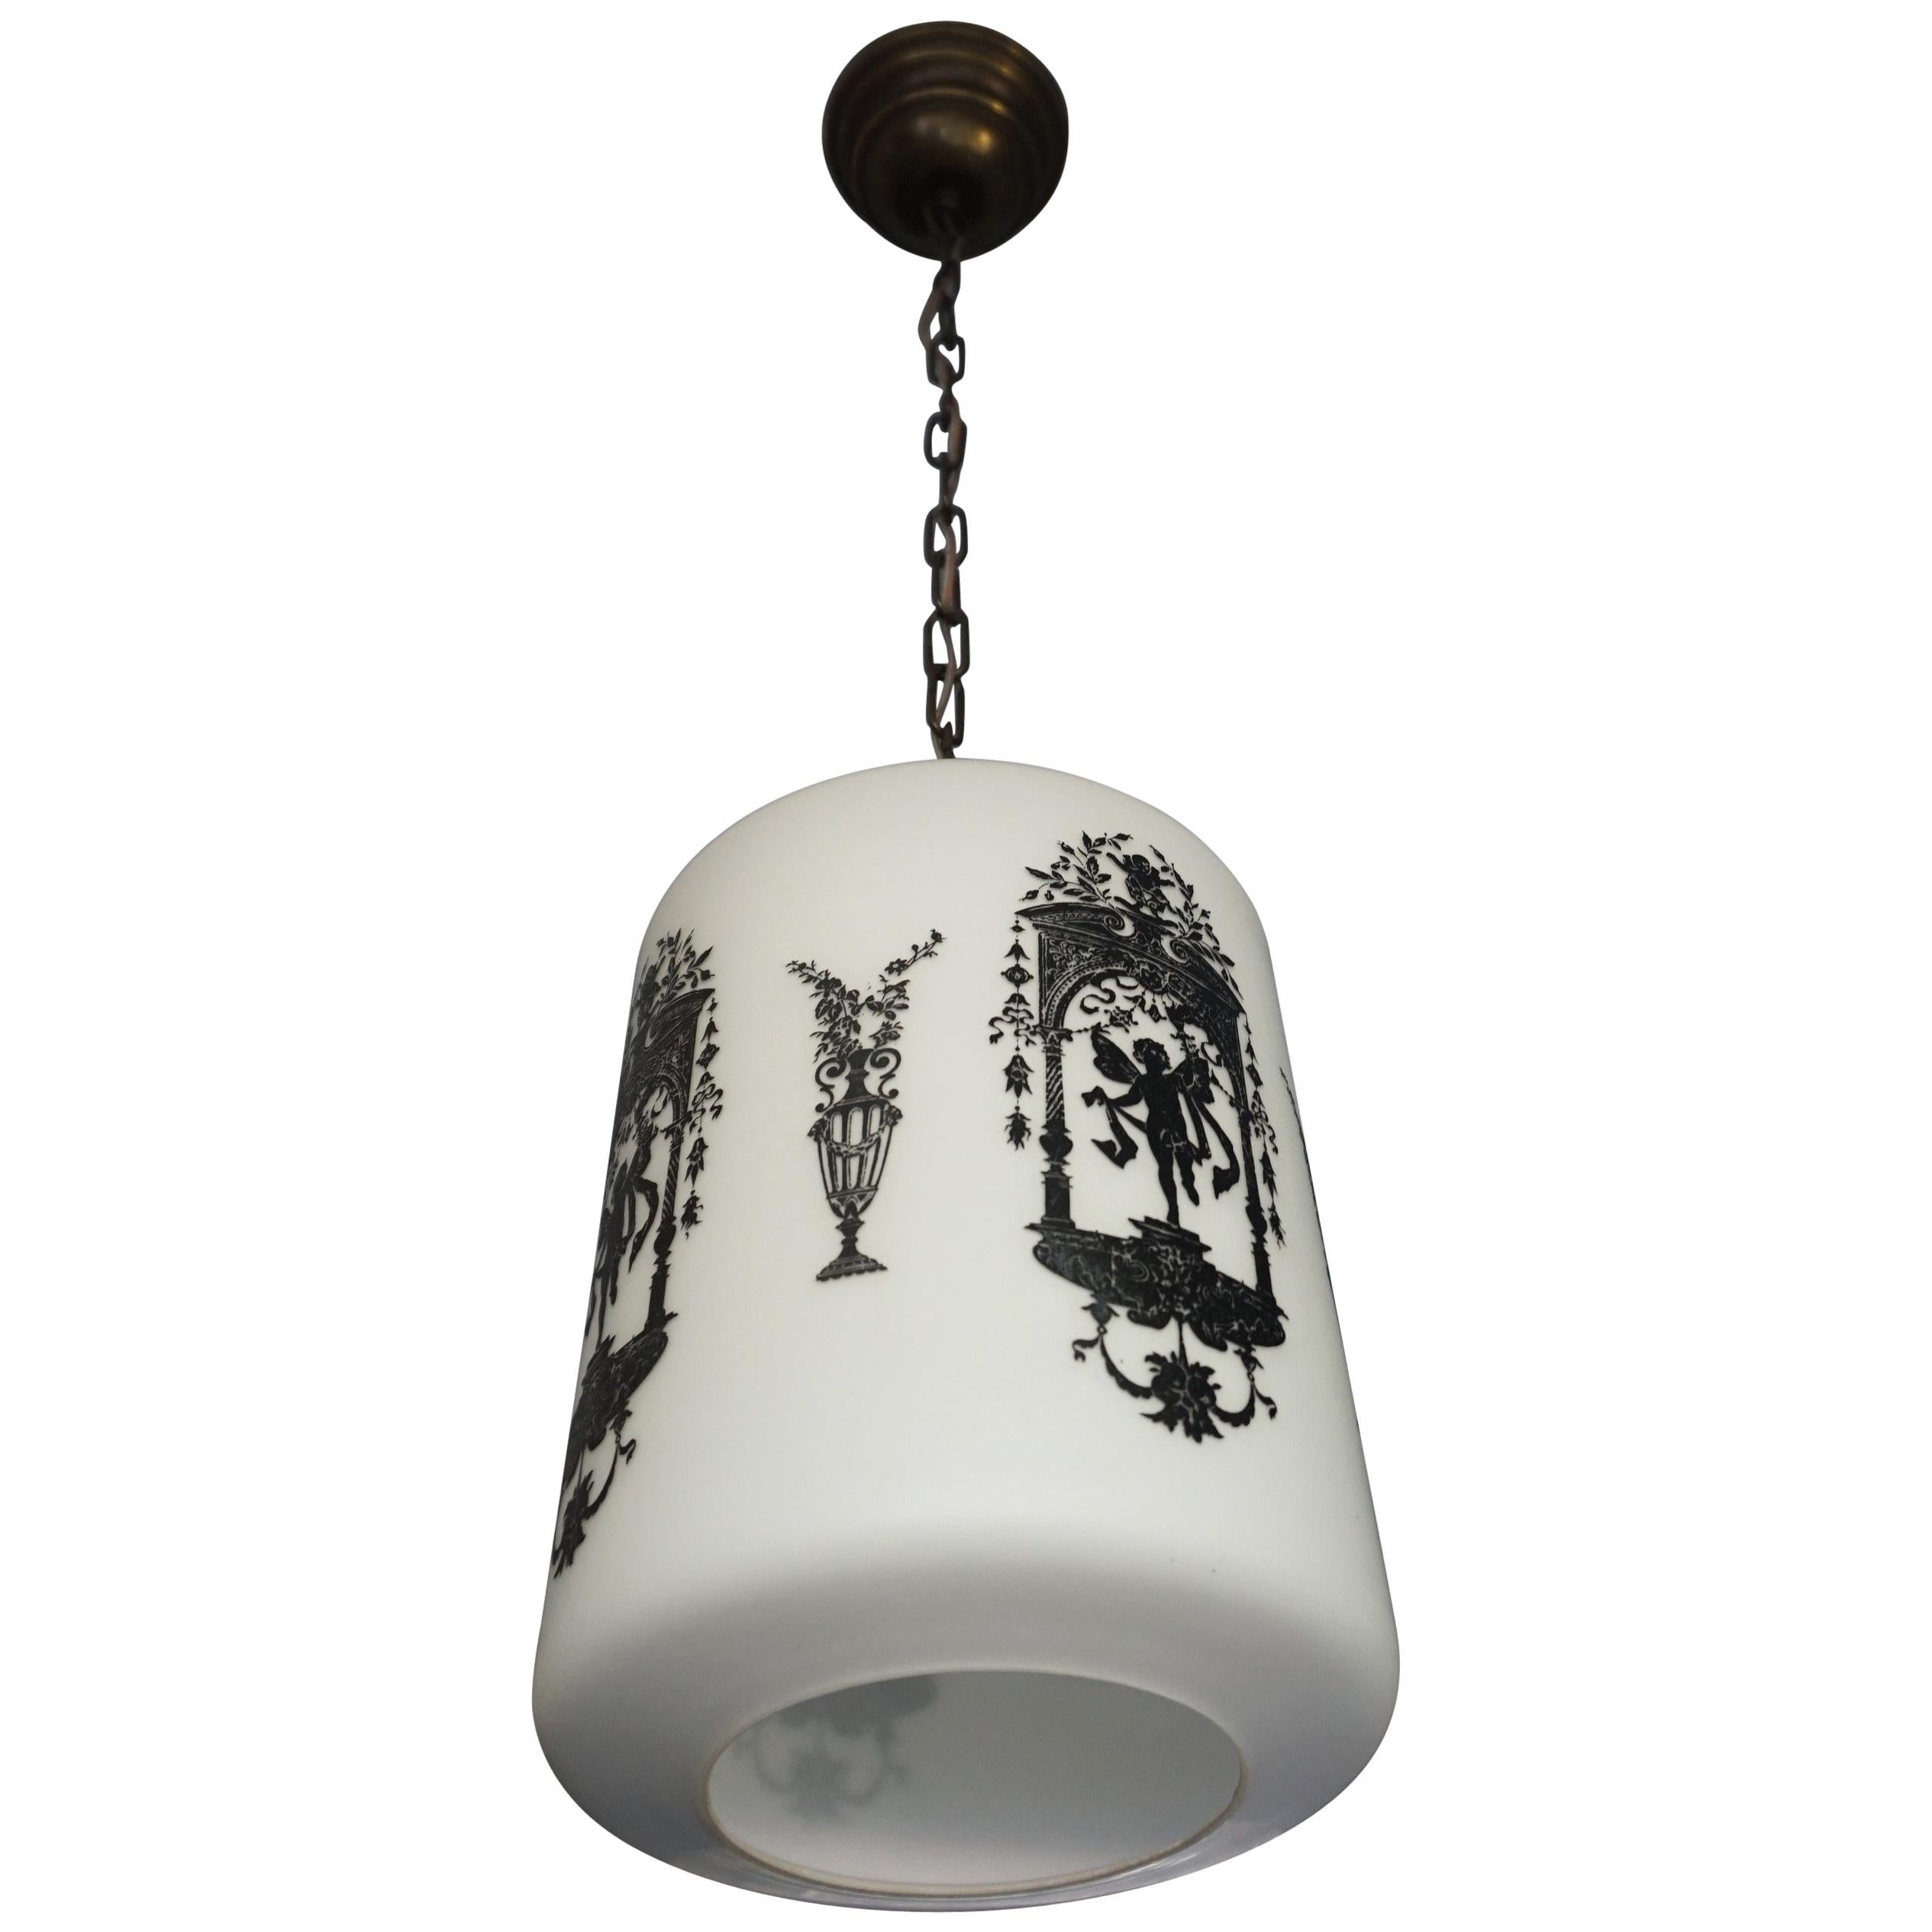 Early to Mid-20th Century Snowy White Glass Pendant with Black Renaissance Decor